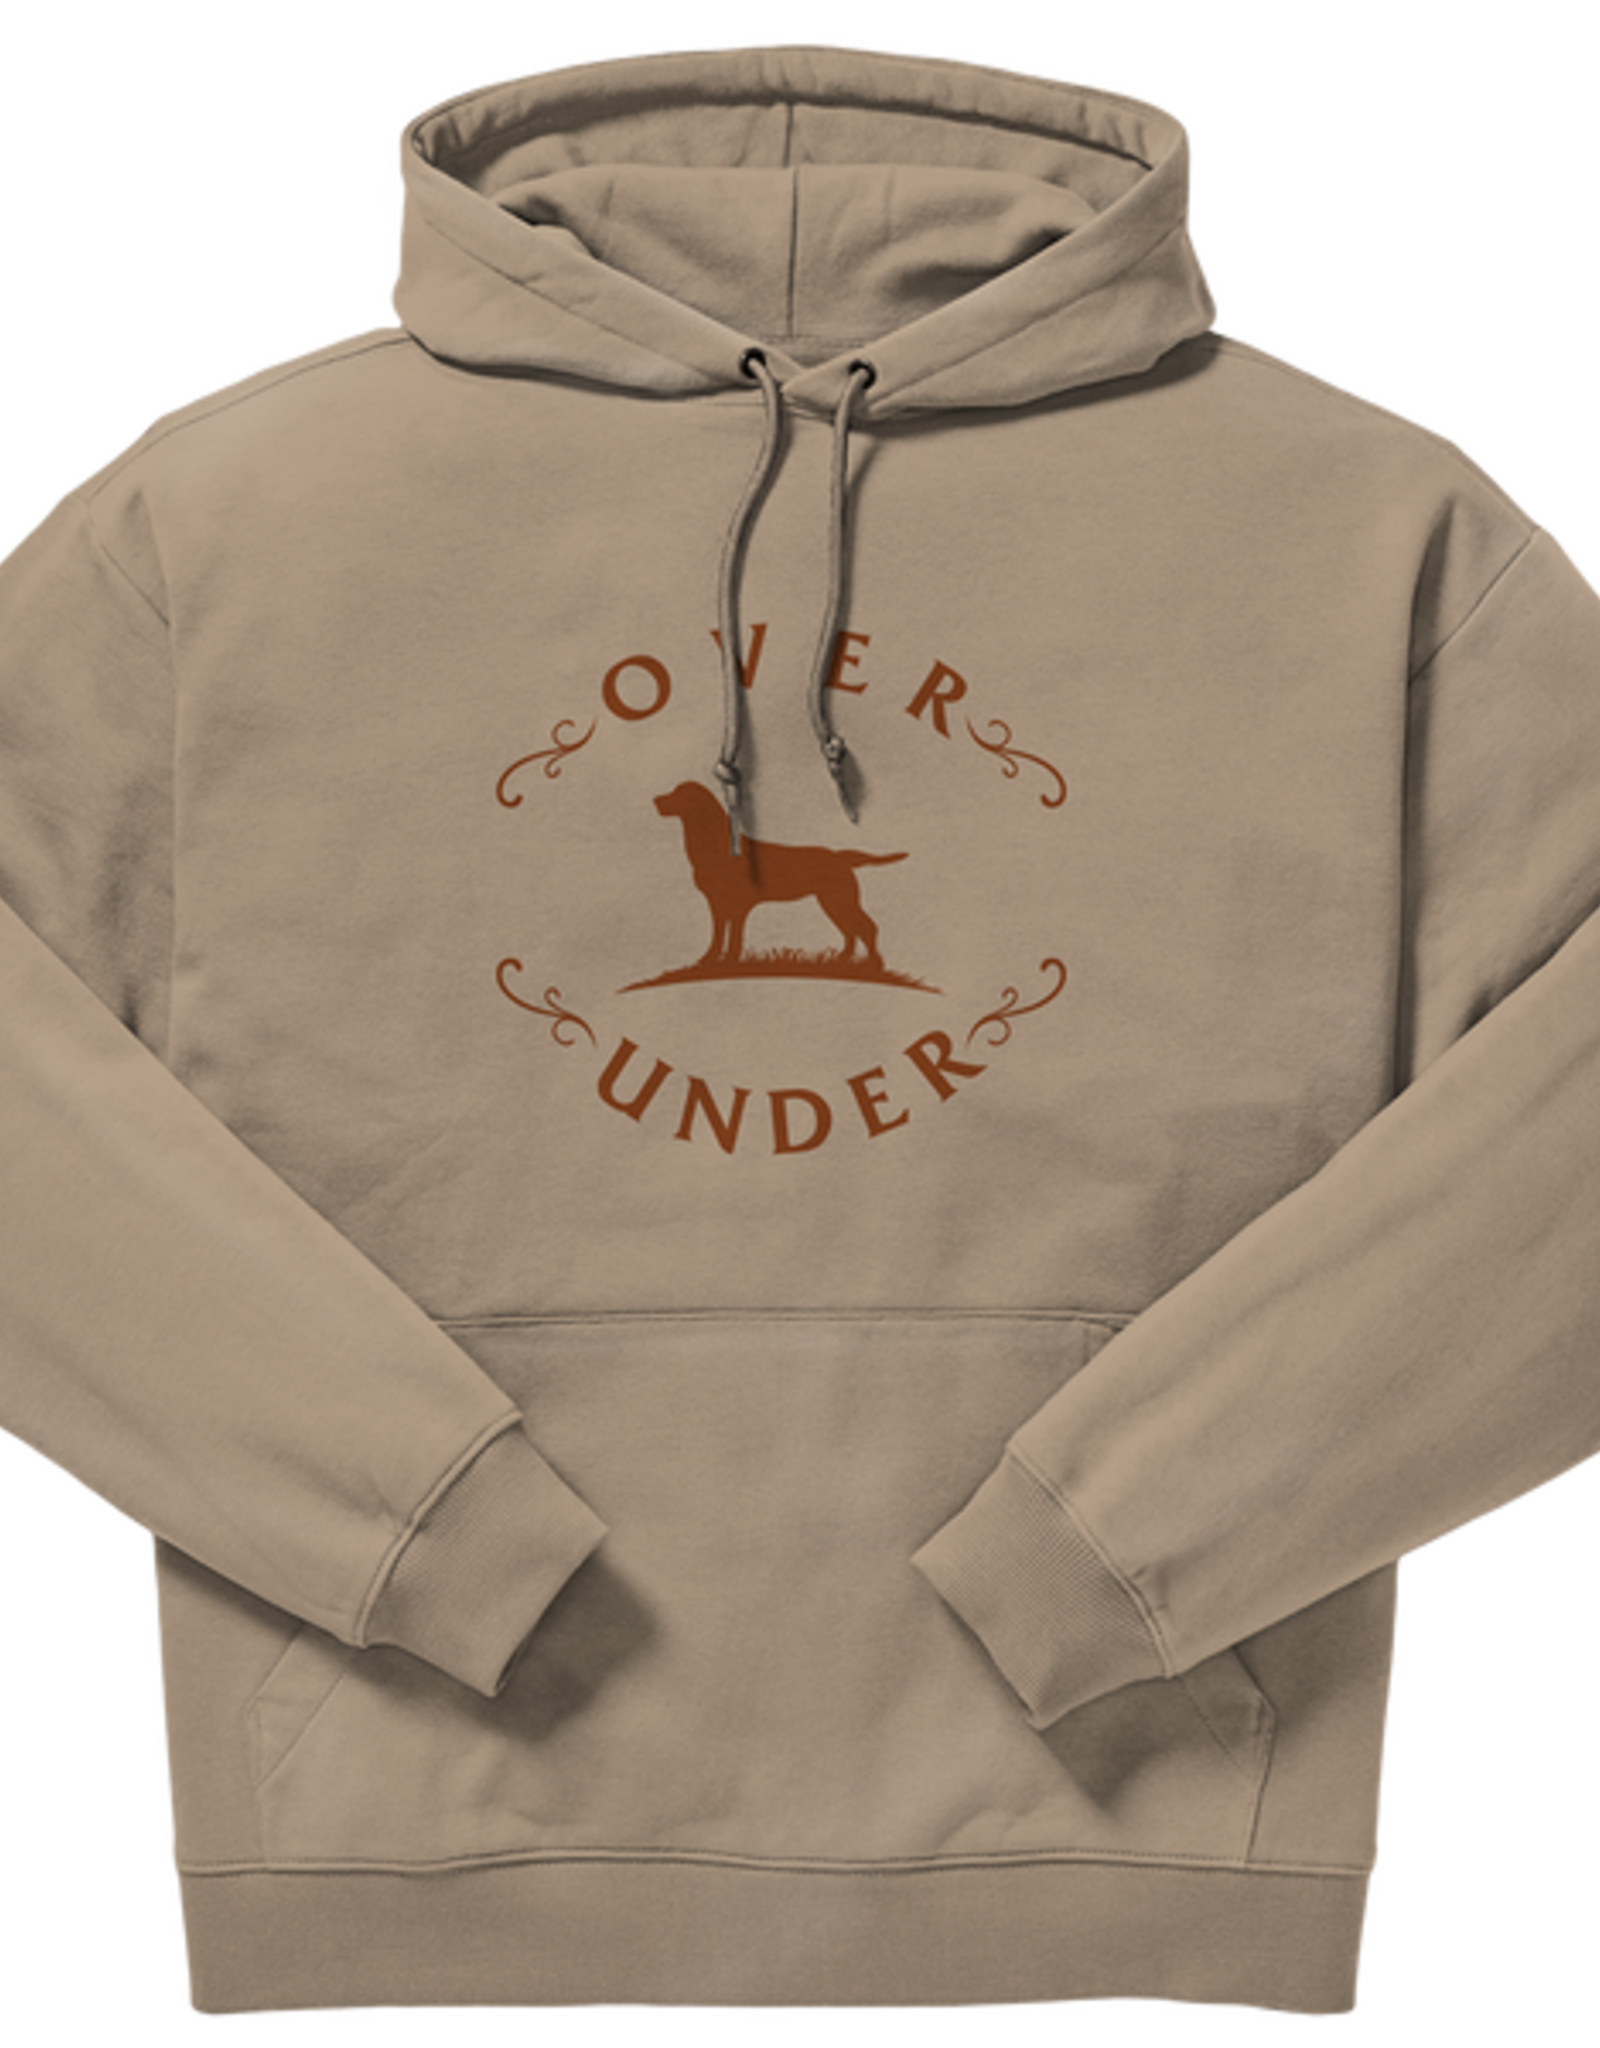 Over Under Clothing The AfterHunt Hoody